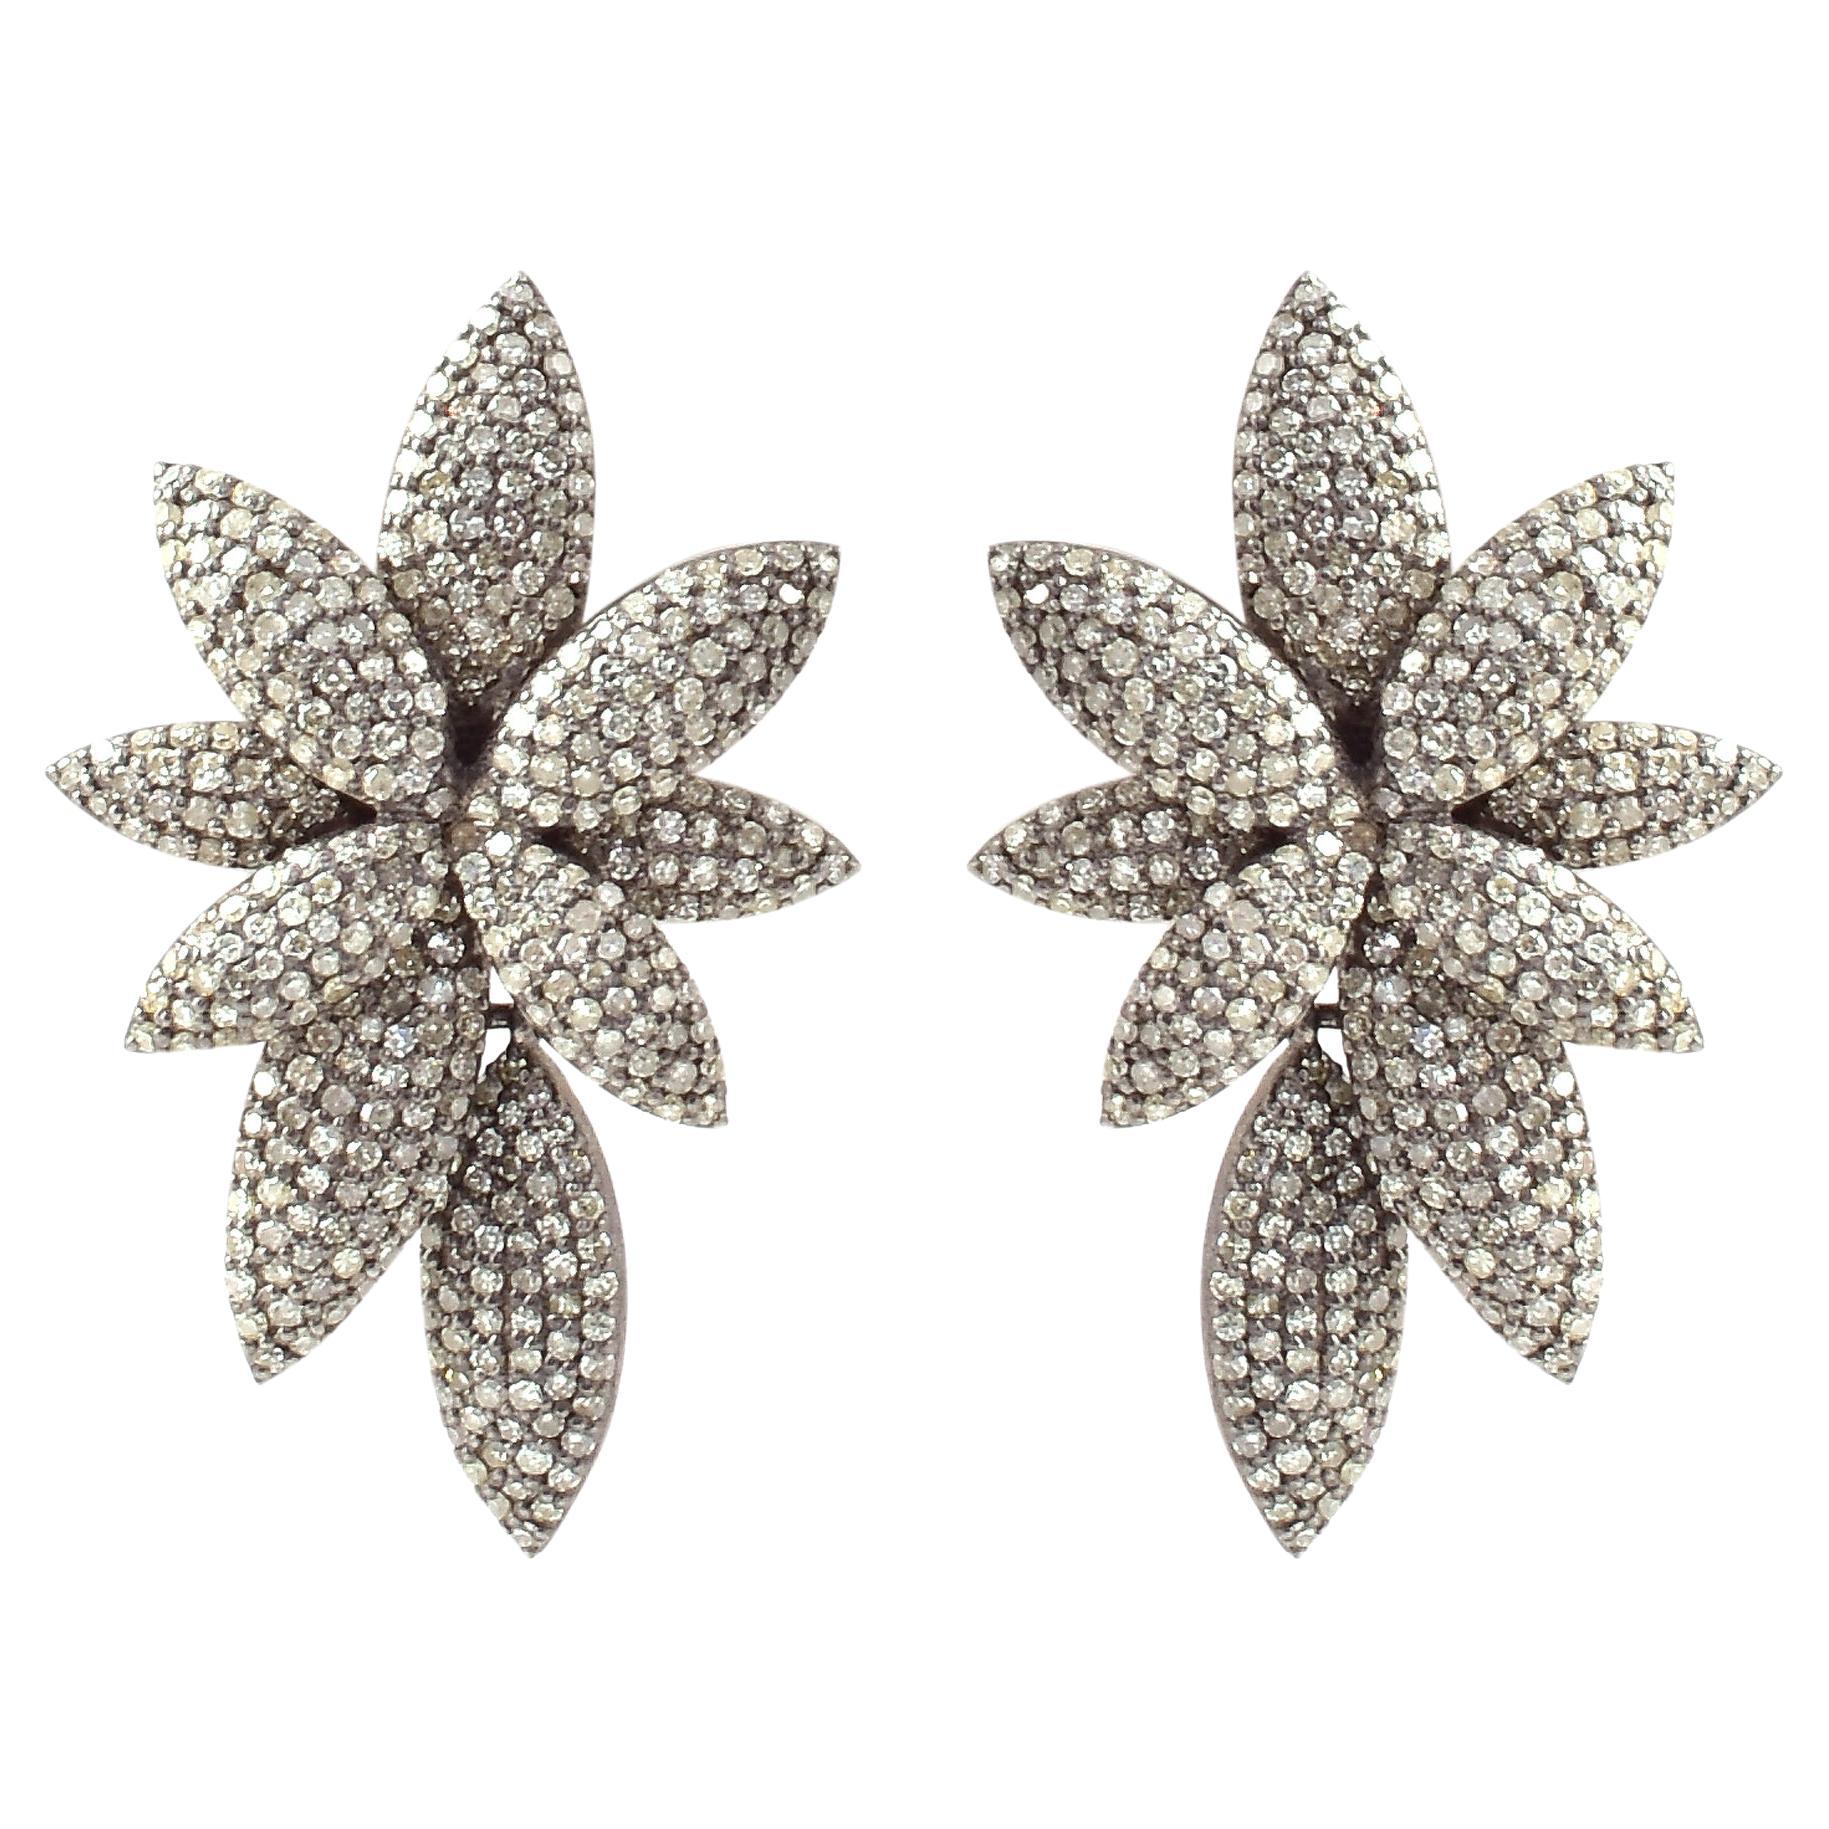 3.01 Carat Diamond Modulation Stud Earrings in Contemporary Style For Sale